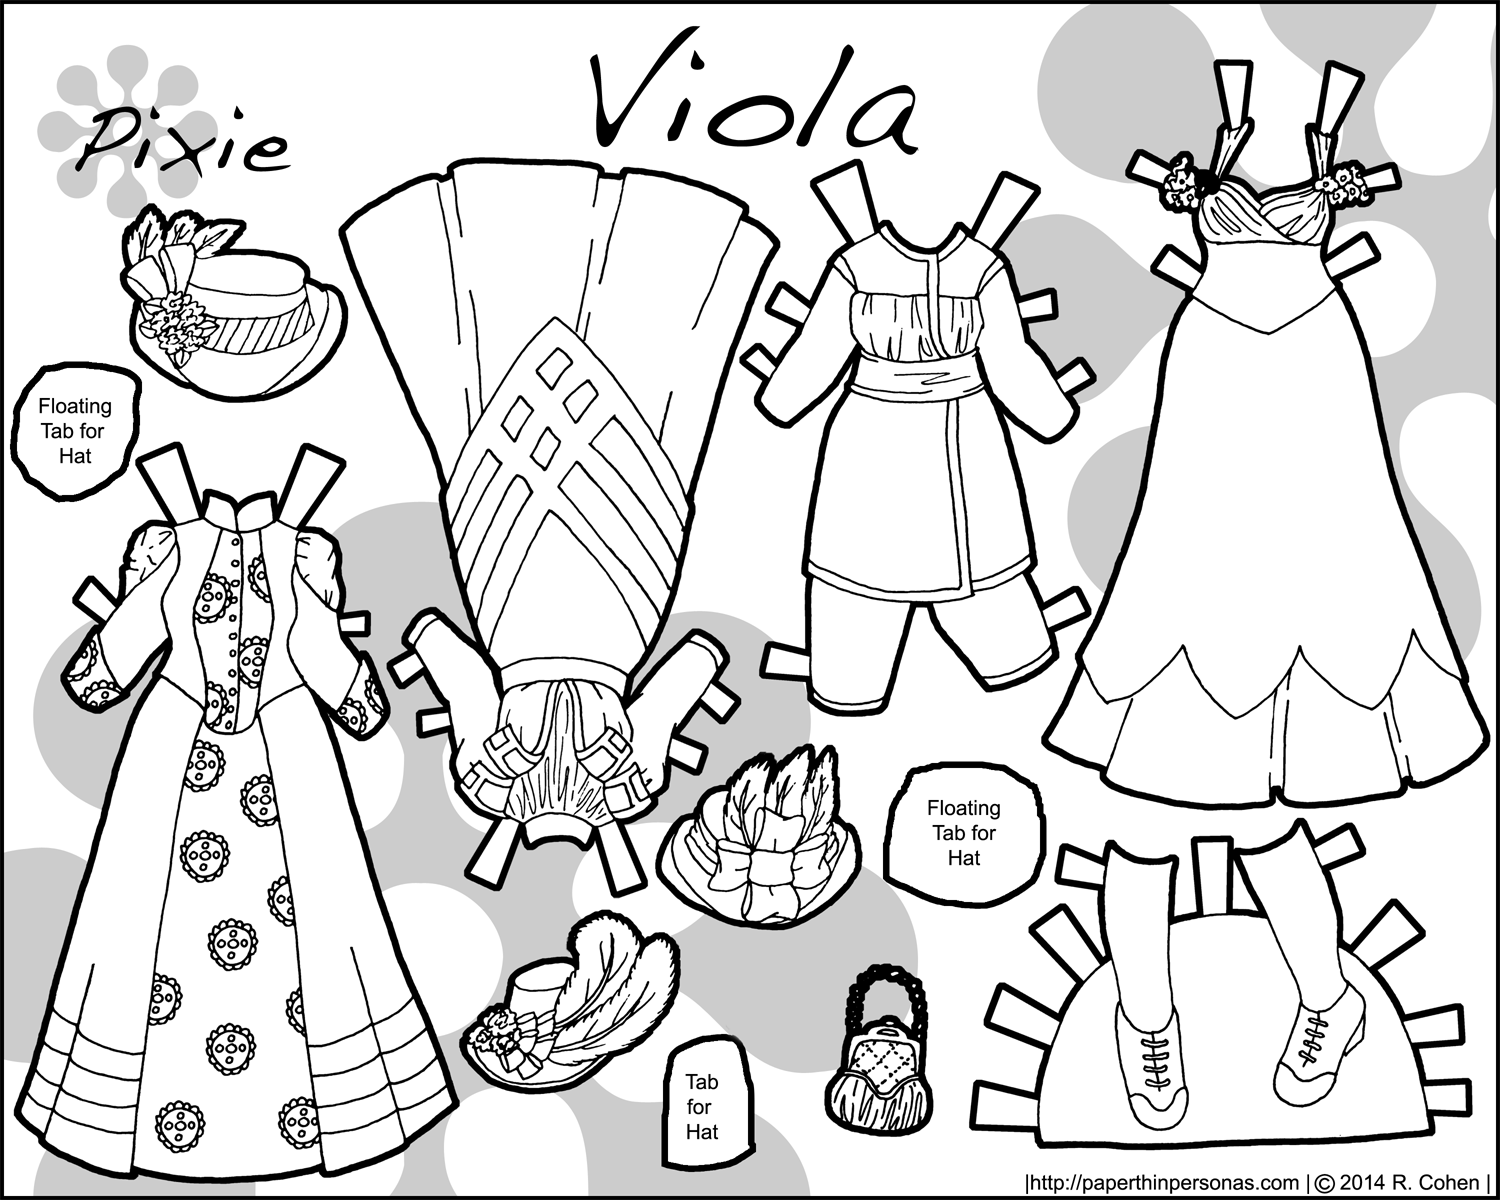 a-paper-doll-to-print-from-the-1890s-paper-thin-personas